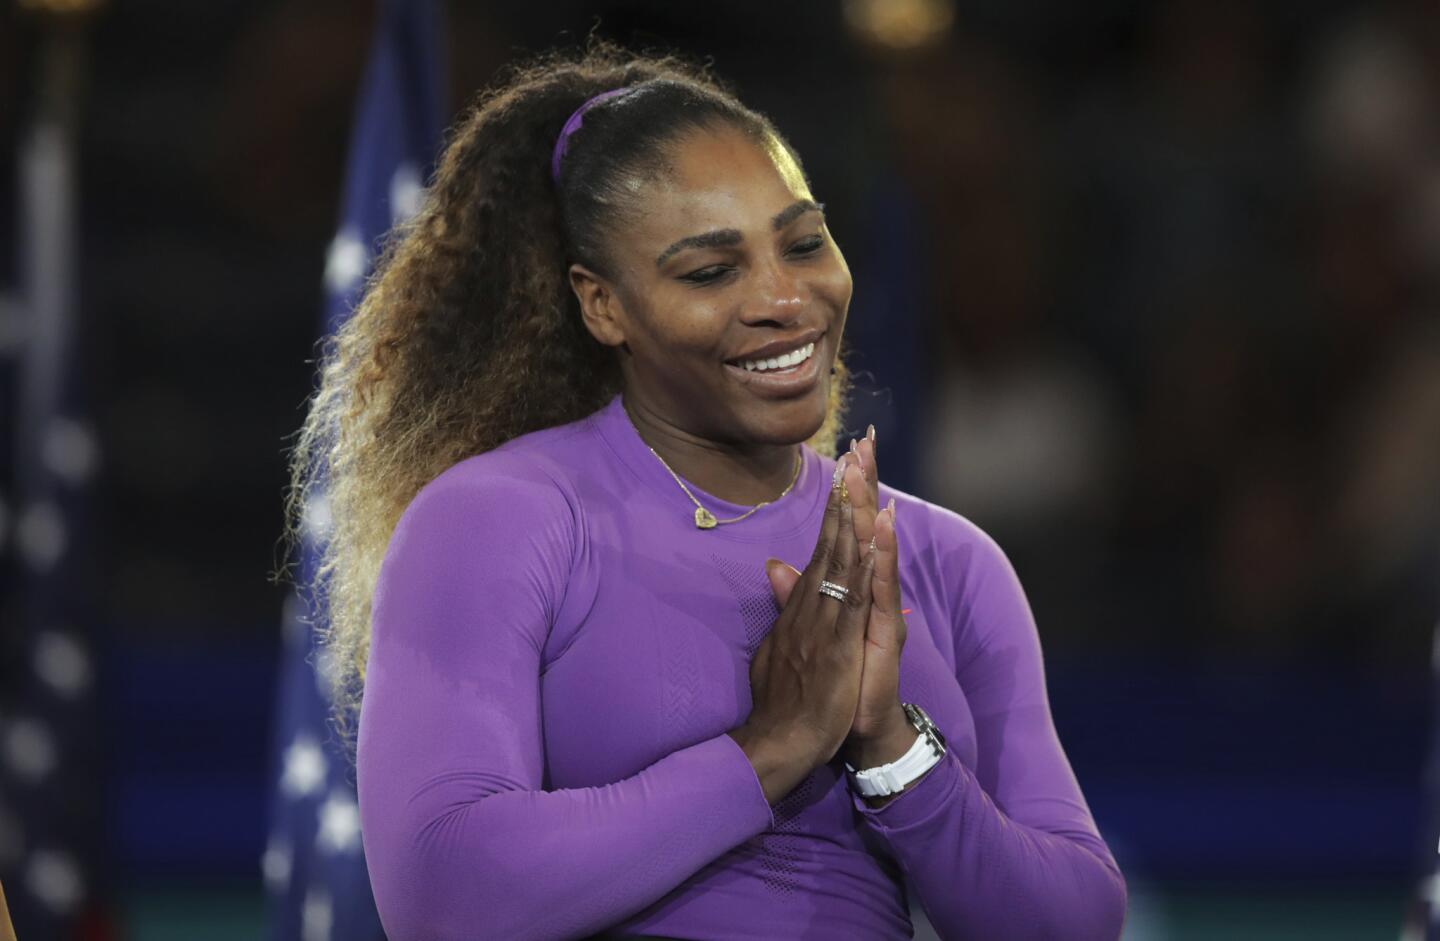 Serena Williams answers questions during an interview after losing to Bianca Andreescu during her Women's Singles final match inside the Billie Jean King National Tennis Center on Sept. 7, 2019, in Queens.